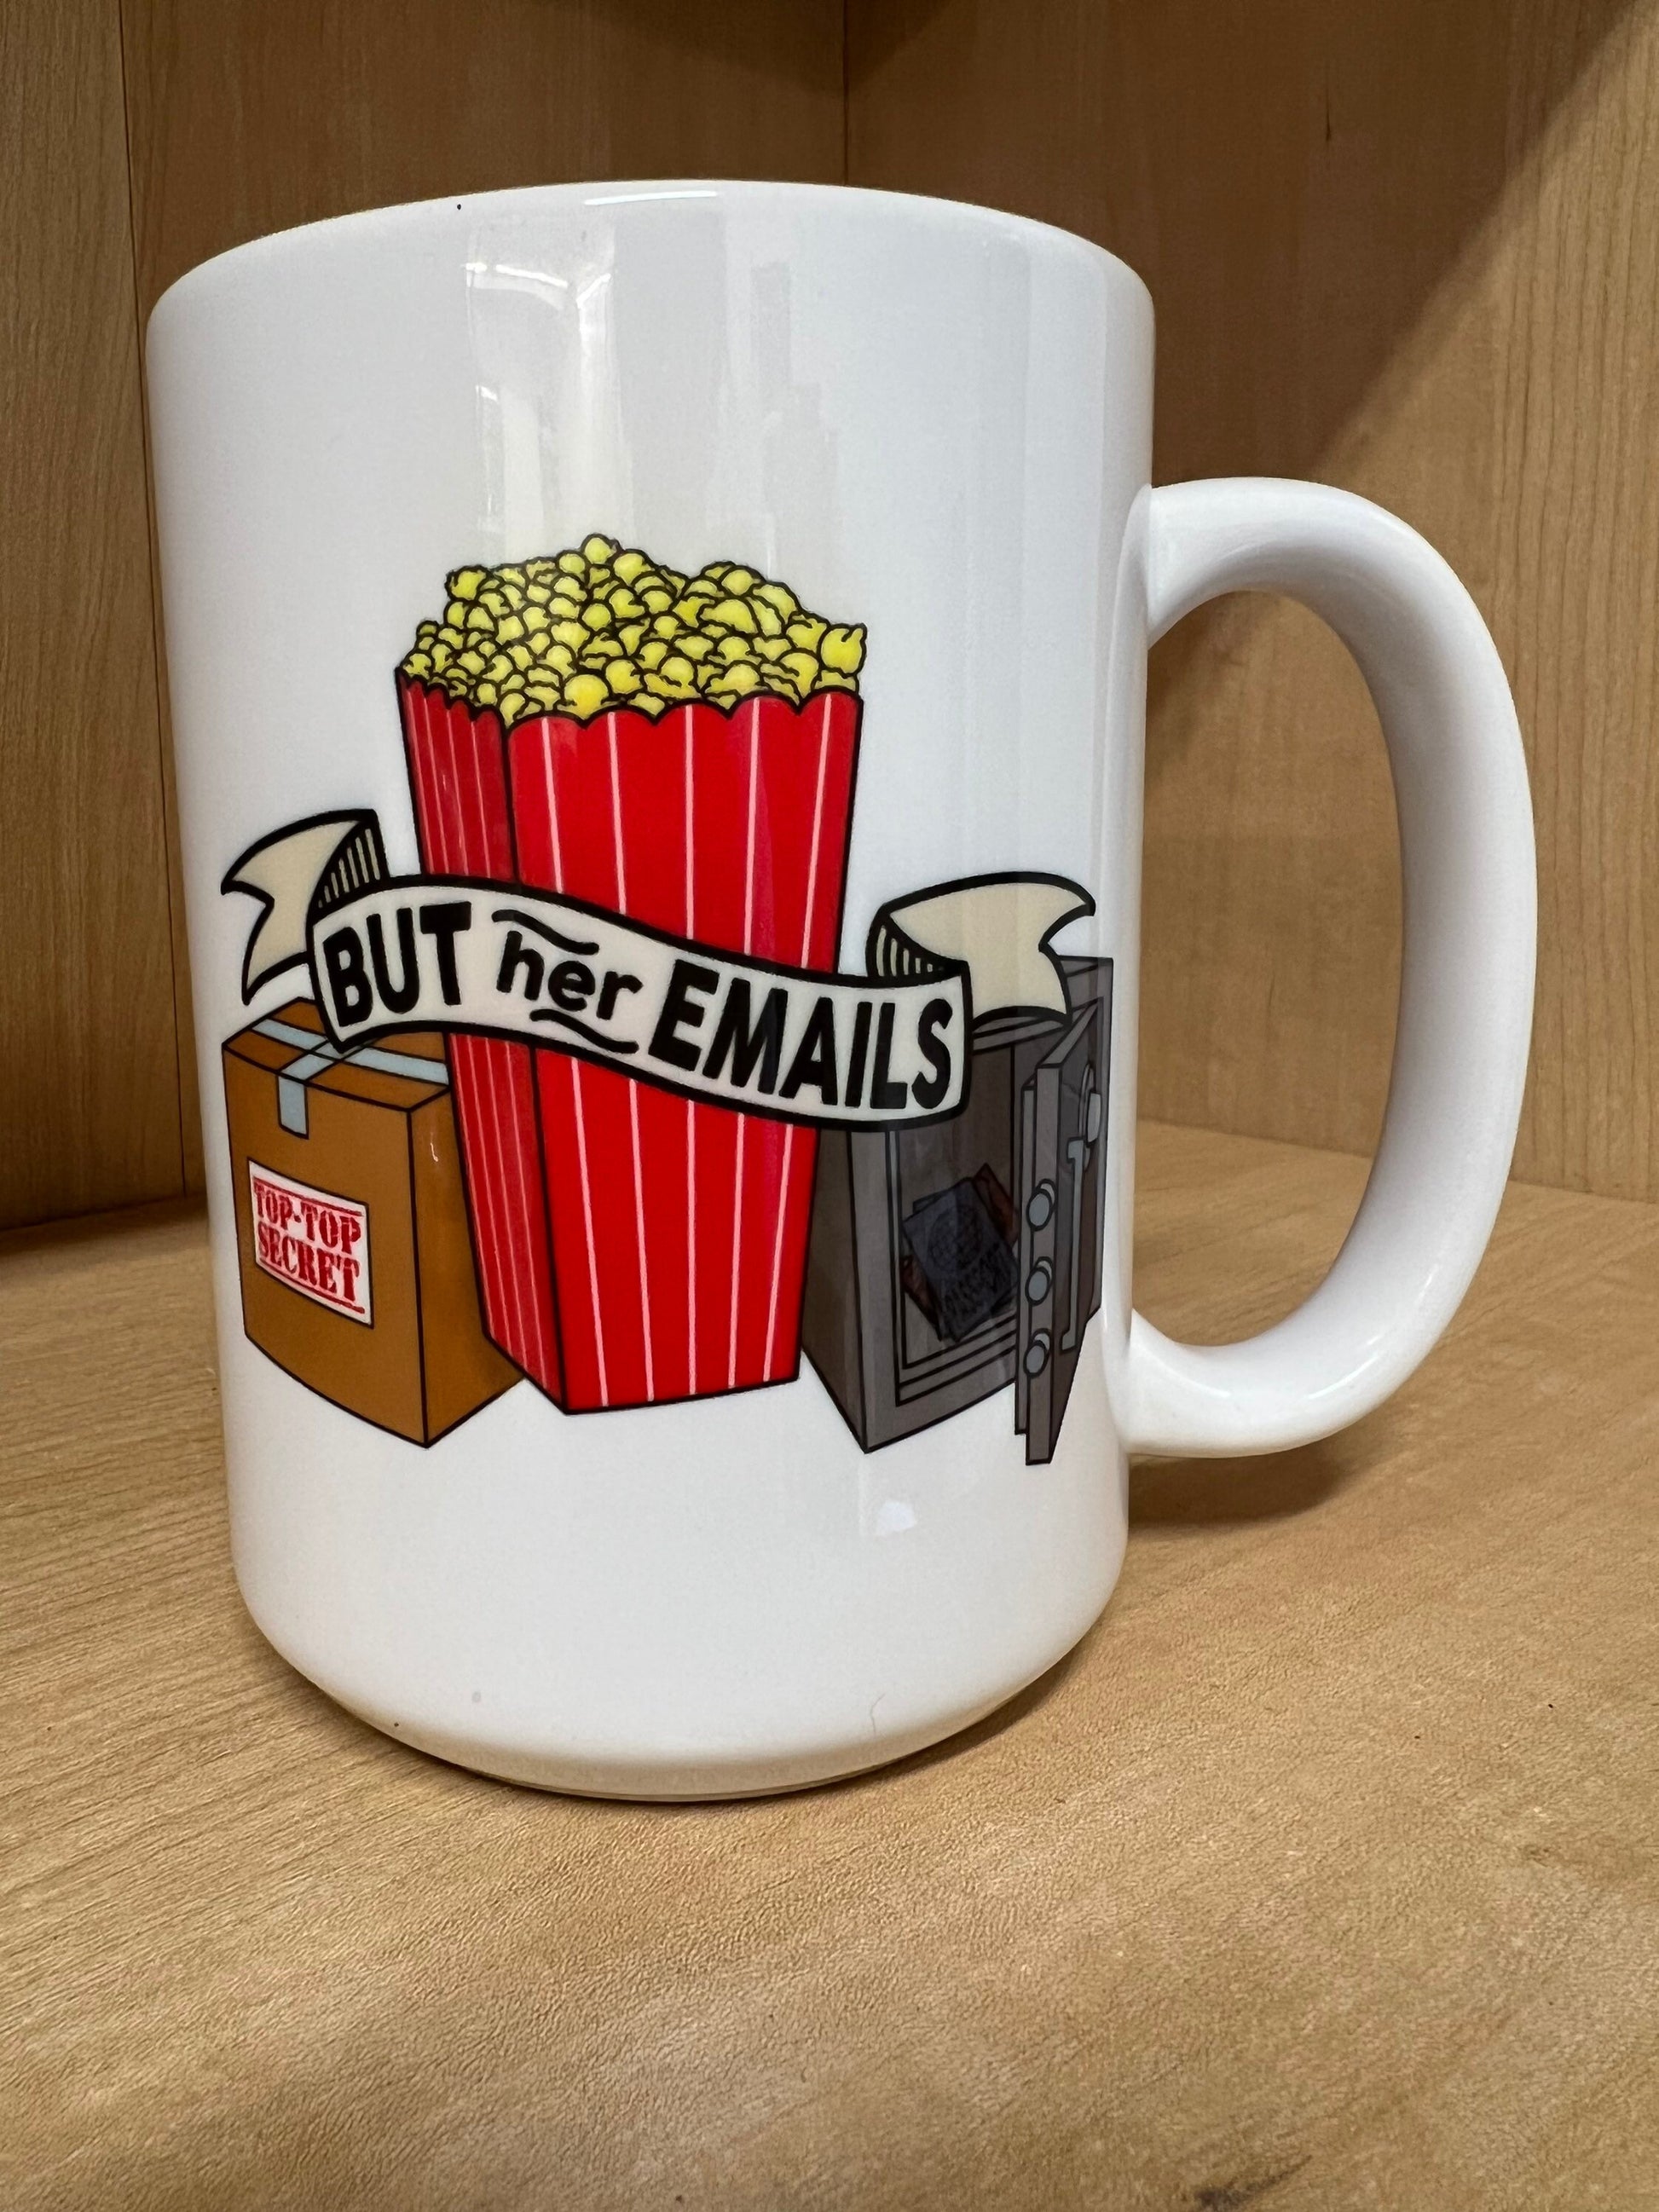 Popcorn MUG  - trump for prison - but her emails - and more options!